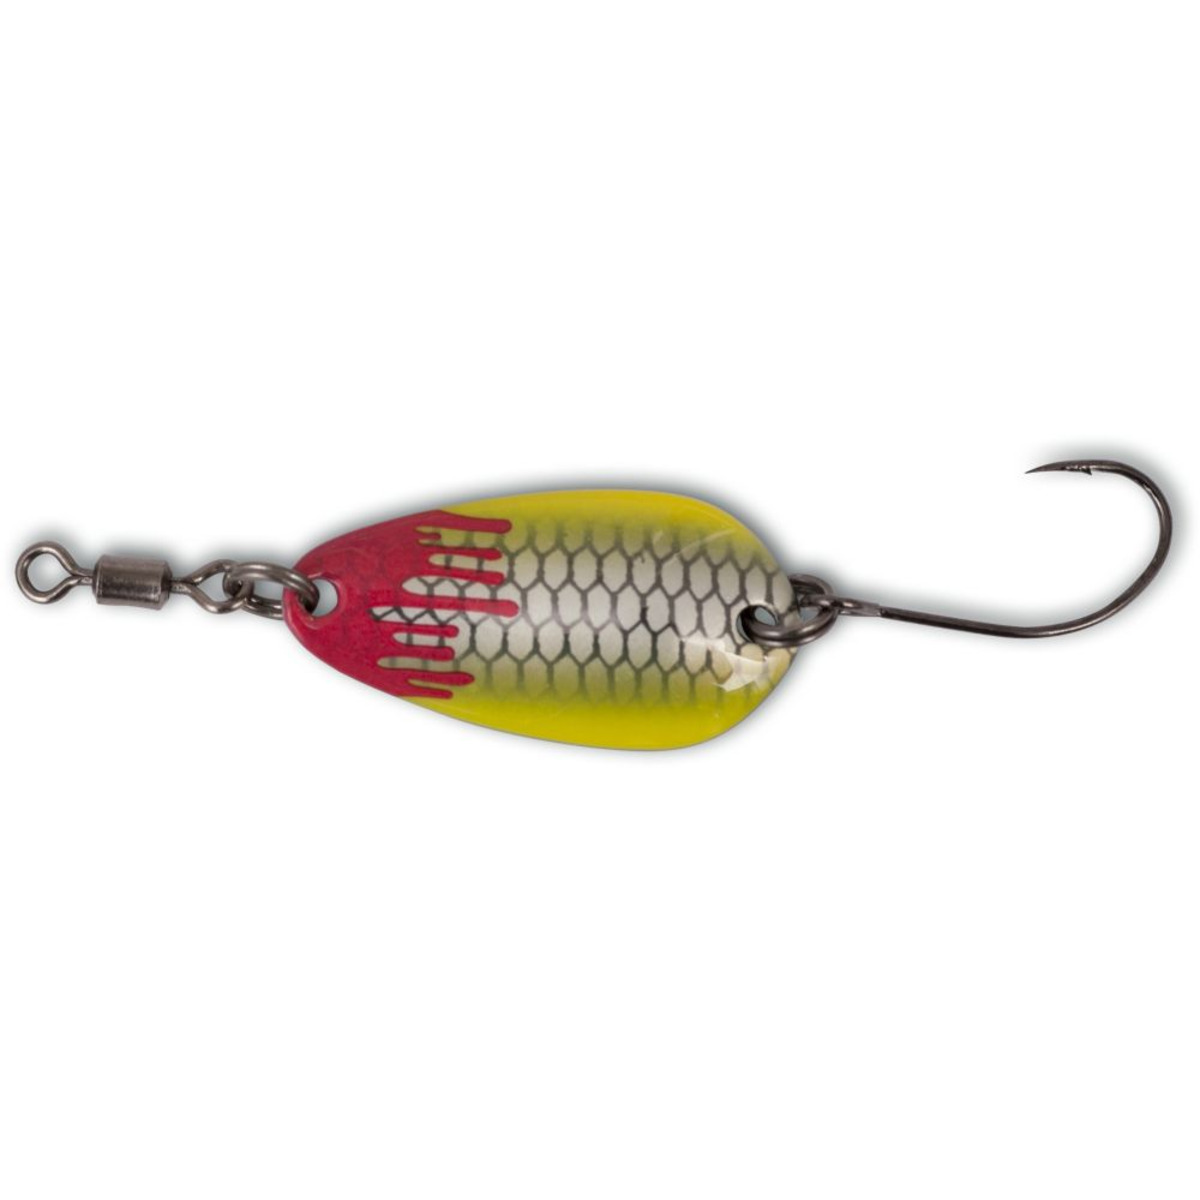 Magic Trout Bloody Loony Spoon - 2 g pearl/yellow